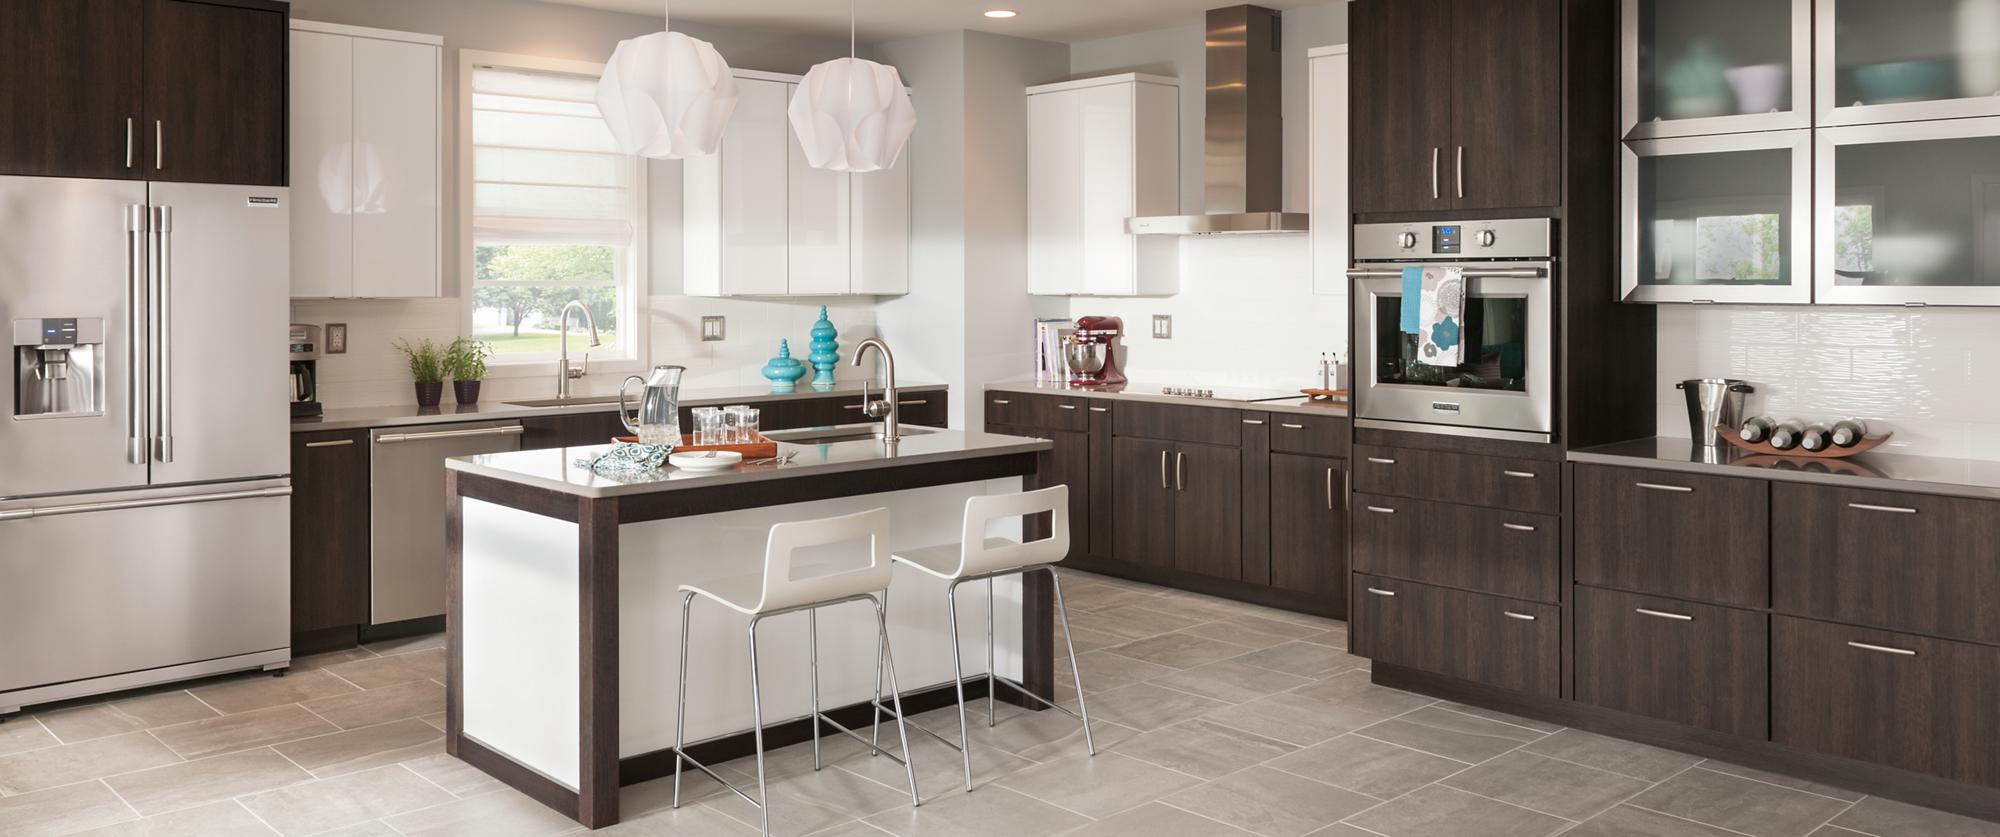 Schuler Cabinetry At Lowes Quality Kitchen Cabinet Construction